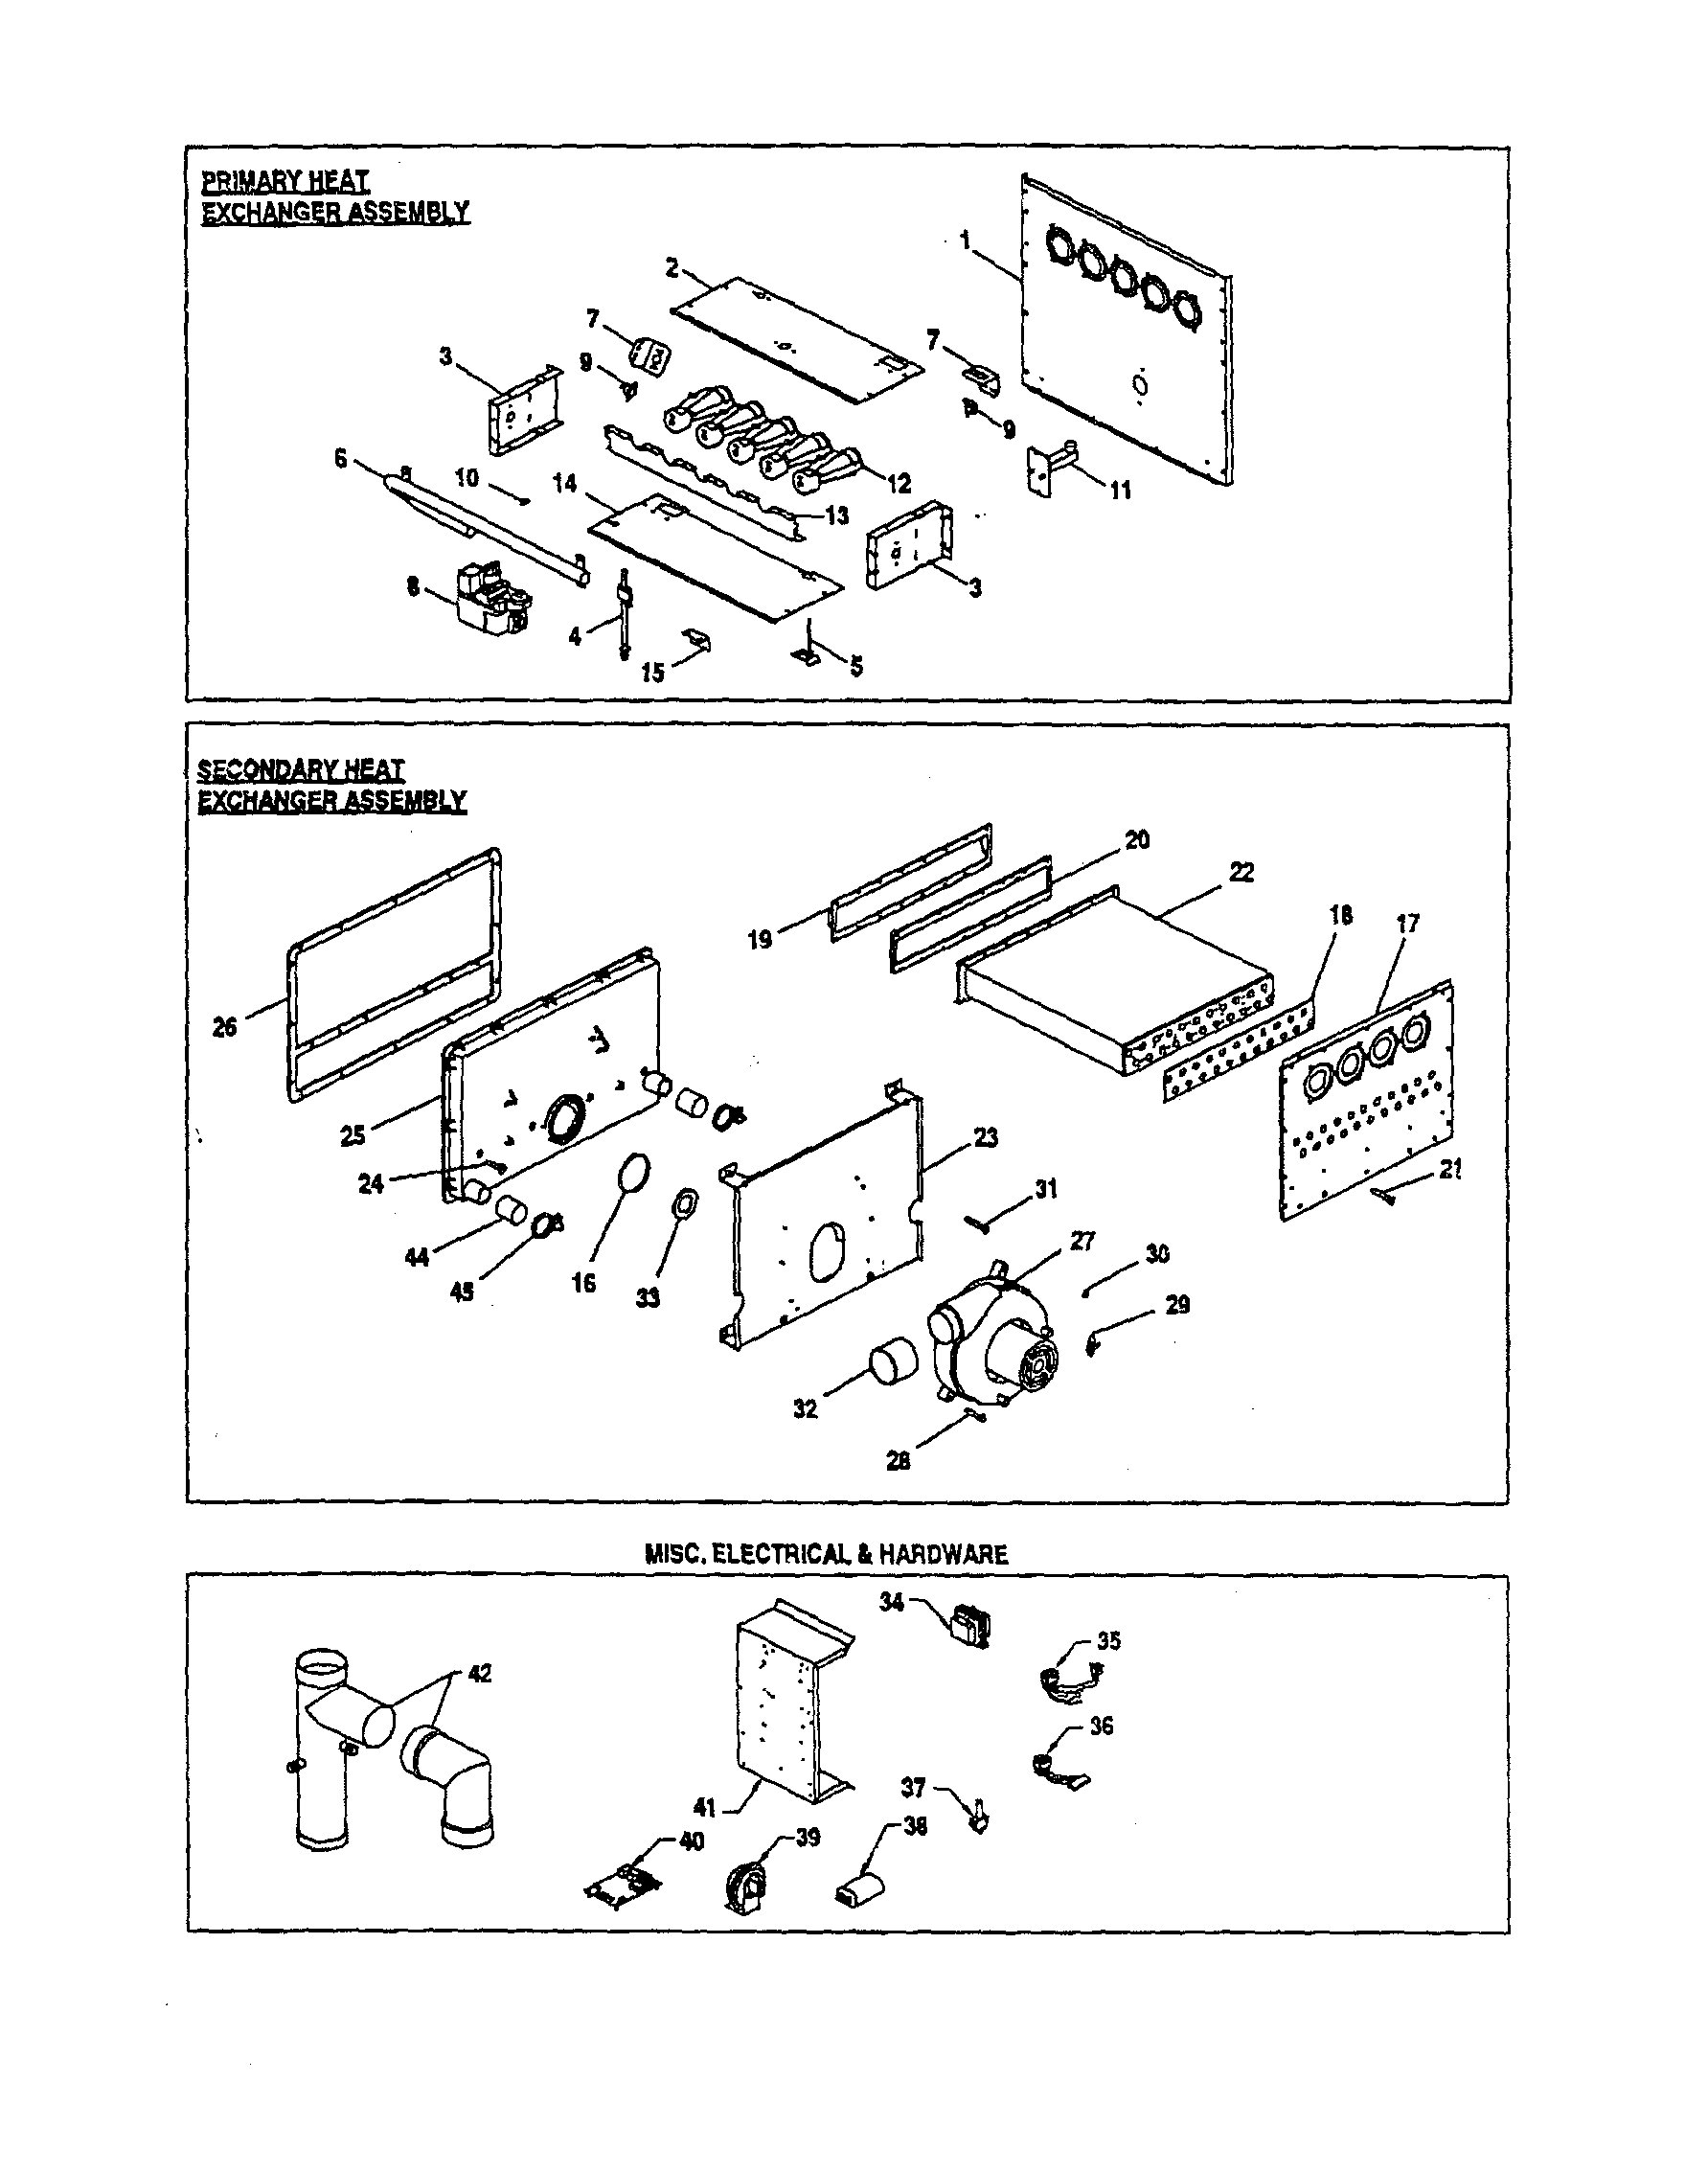 Wiring Diagram For A Goodman Furnace from c.searspartsdirect.com